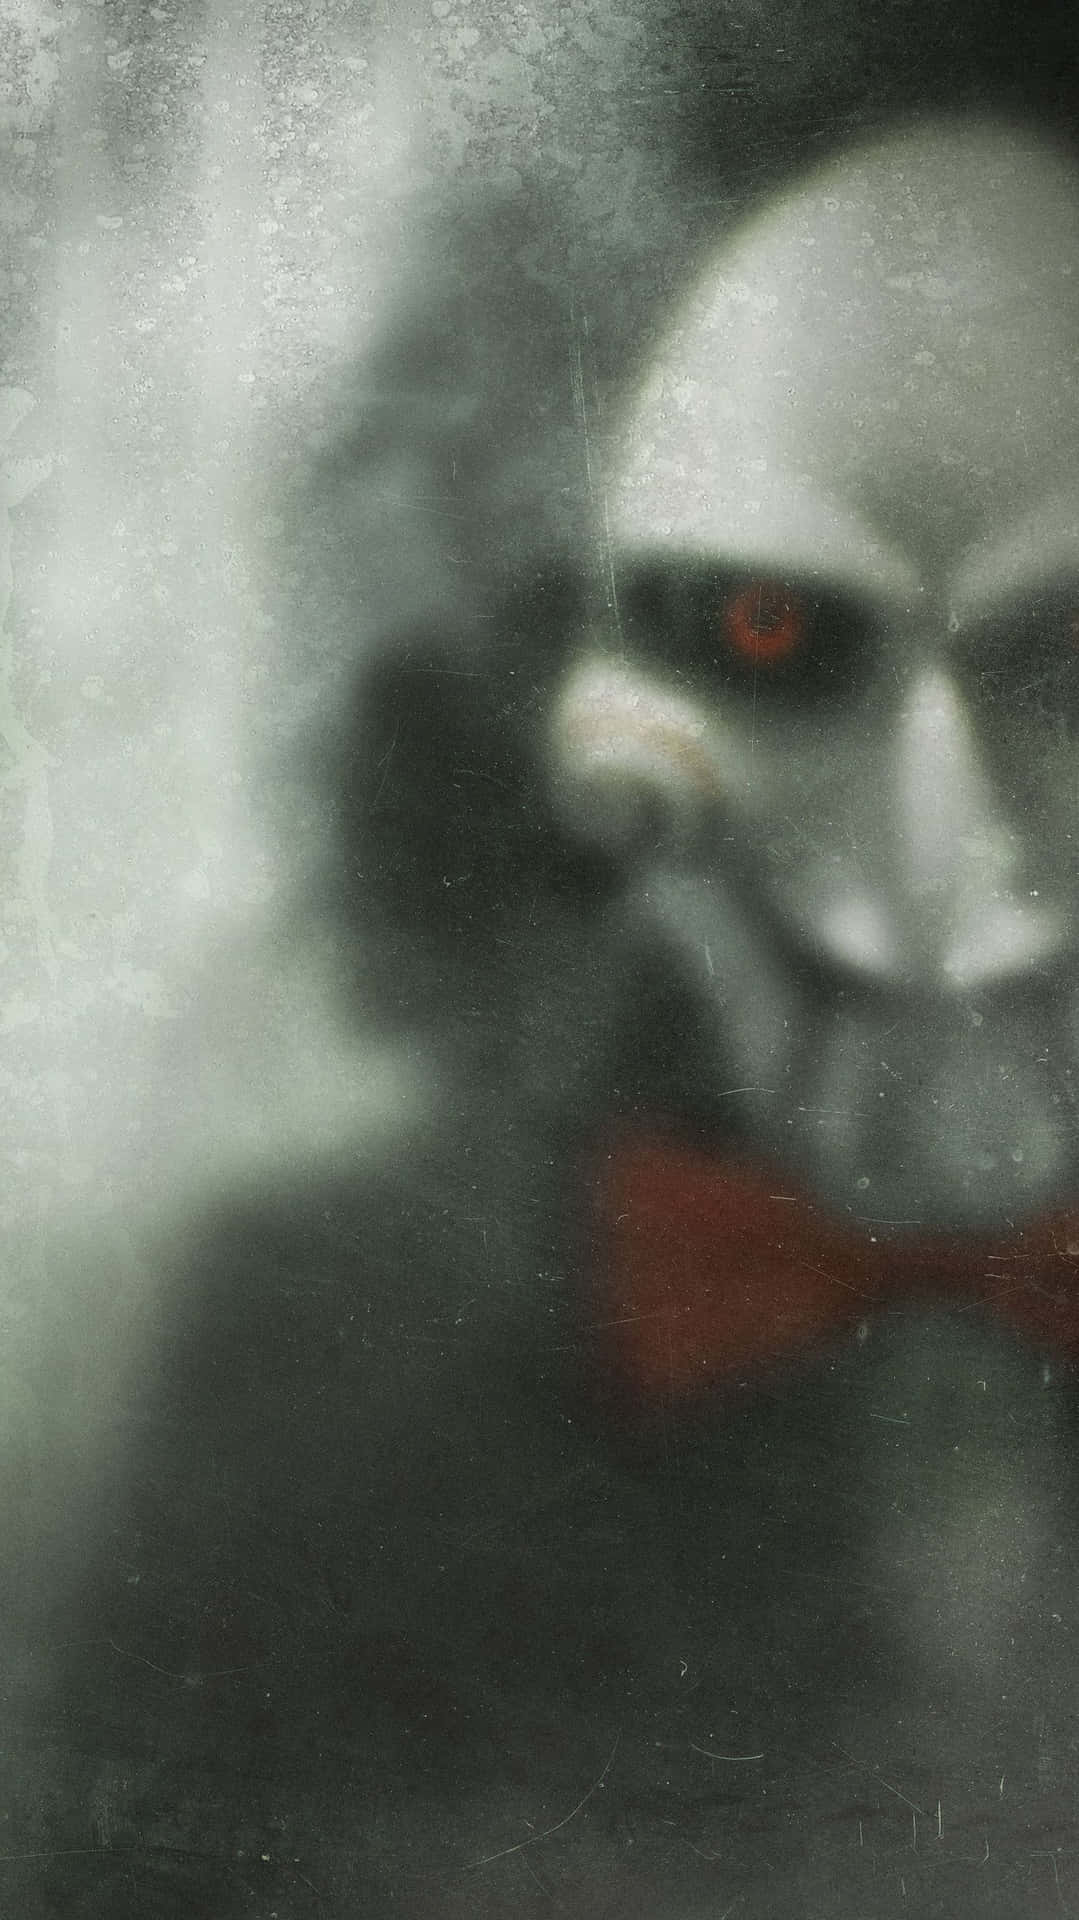 The iconic Saw horror franchise Wallpaper